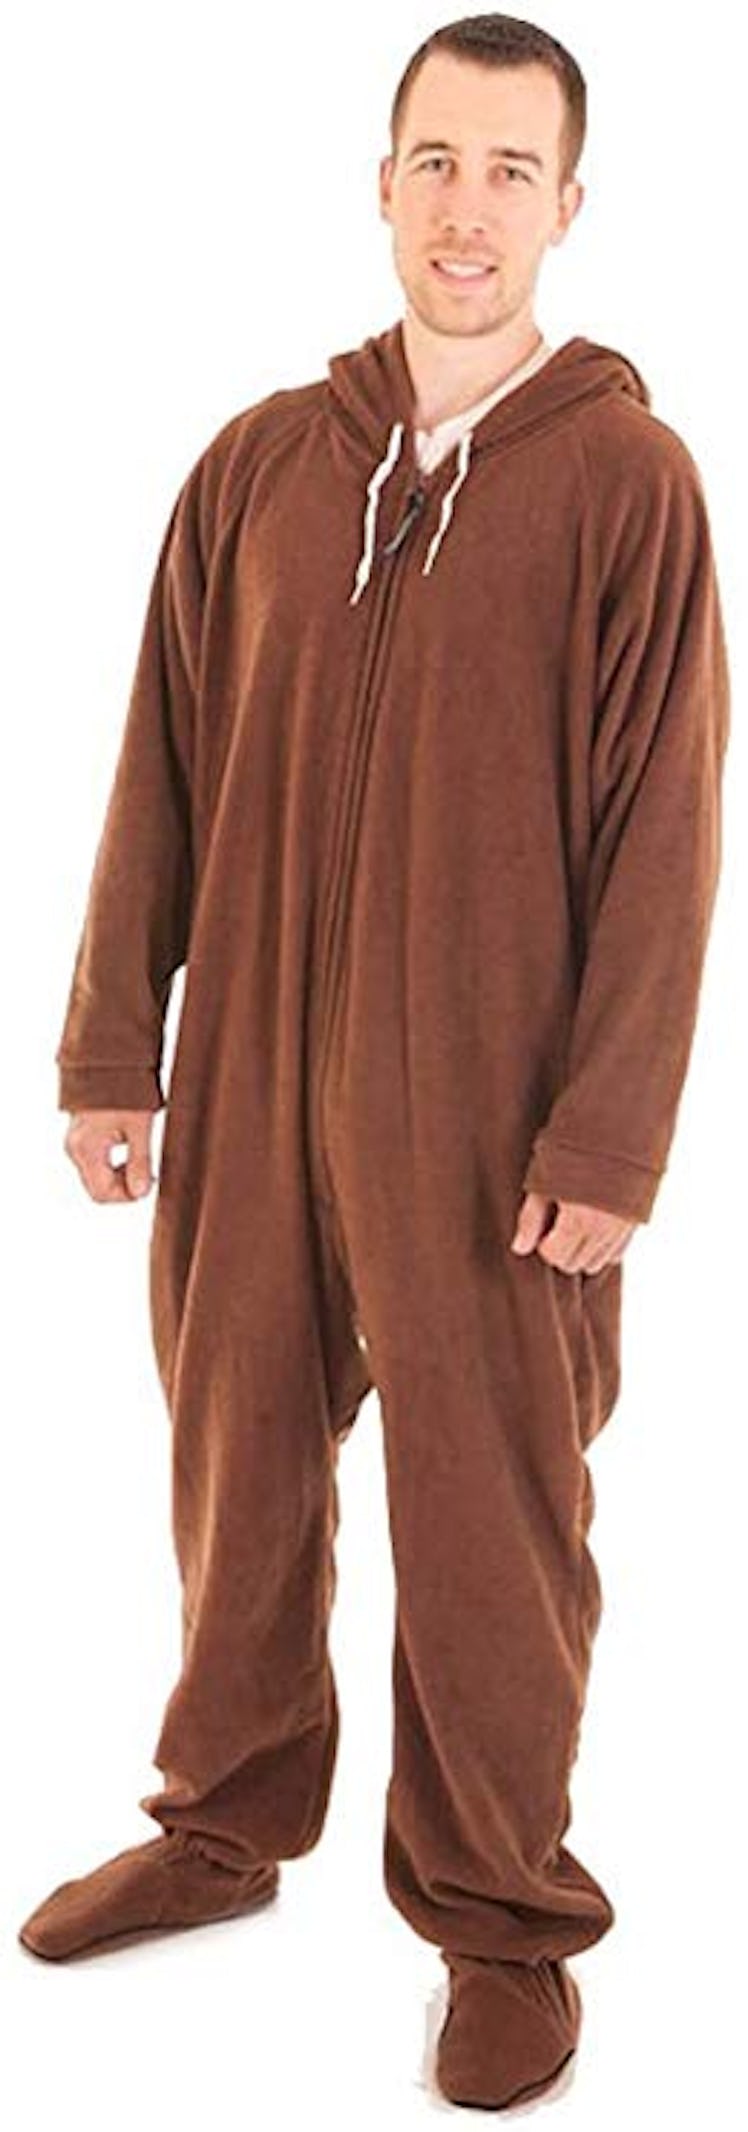 Forever Lazy Footed Adult Onesies